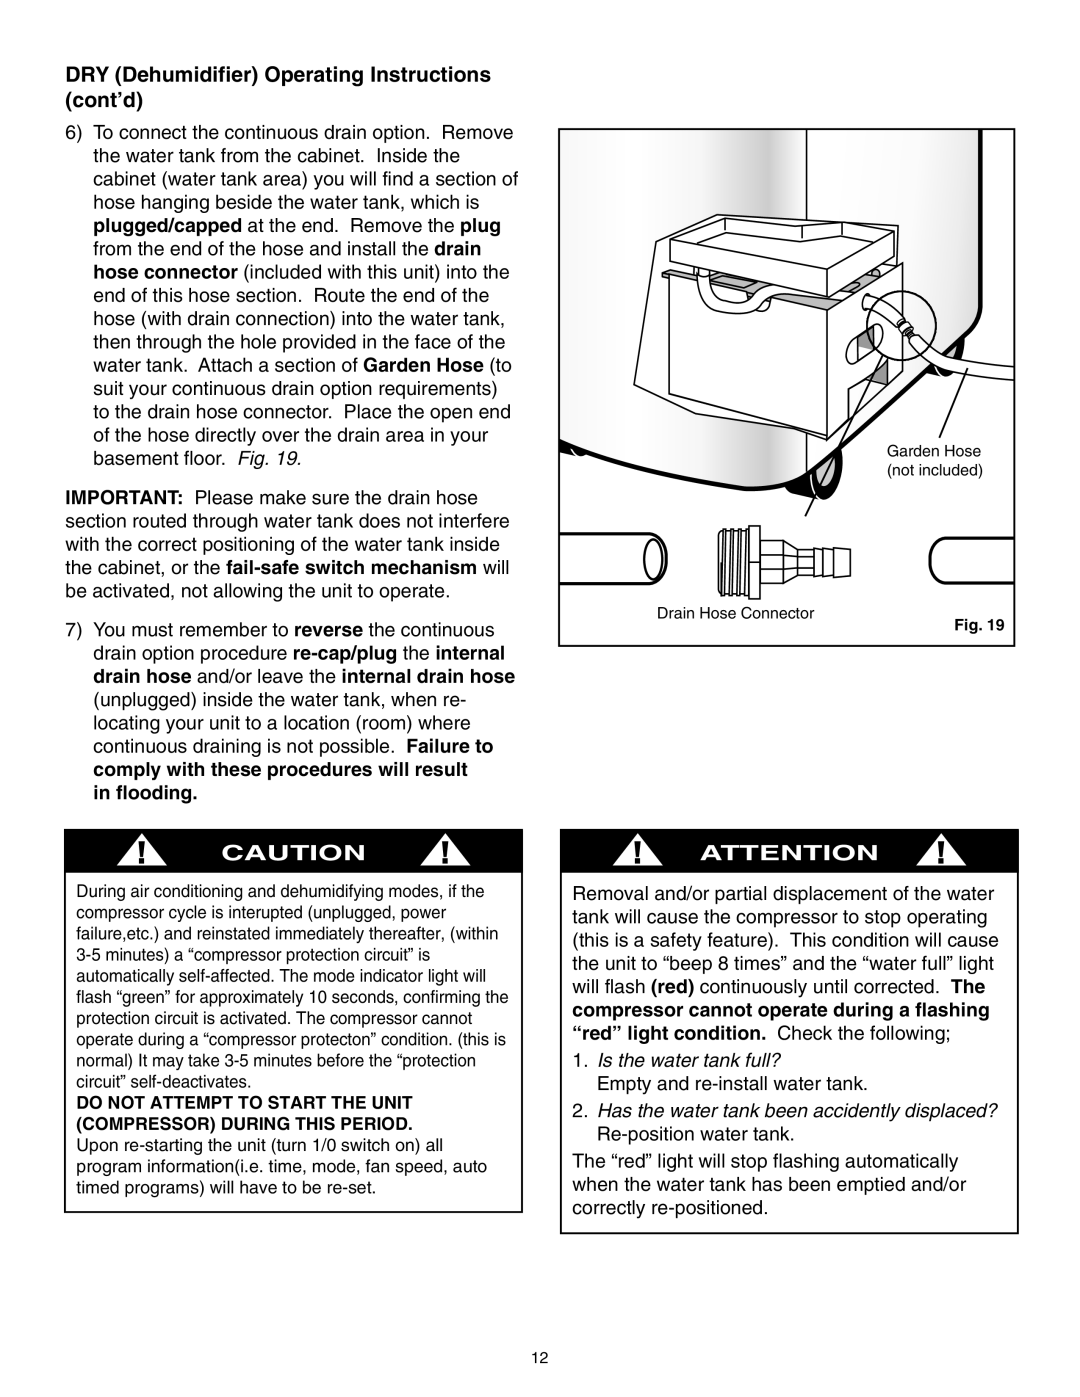 Danby SPAC8499 manual DRY Dehumidifier Operating Instructions cont’d, in flooding, Is the water tank full? 